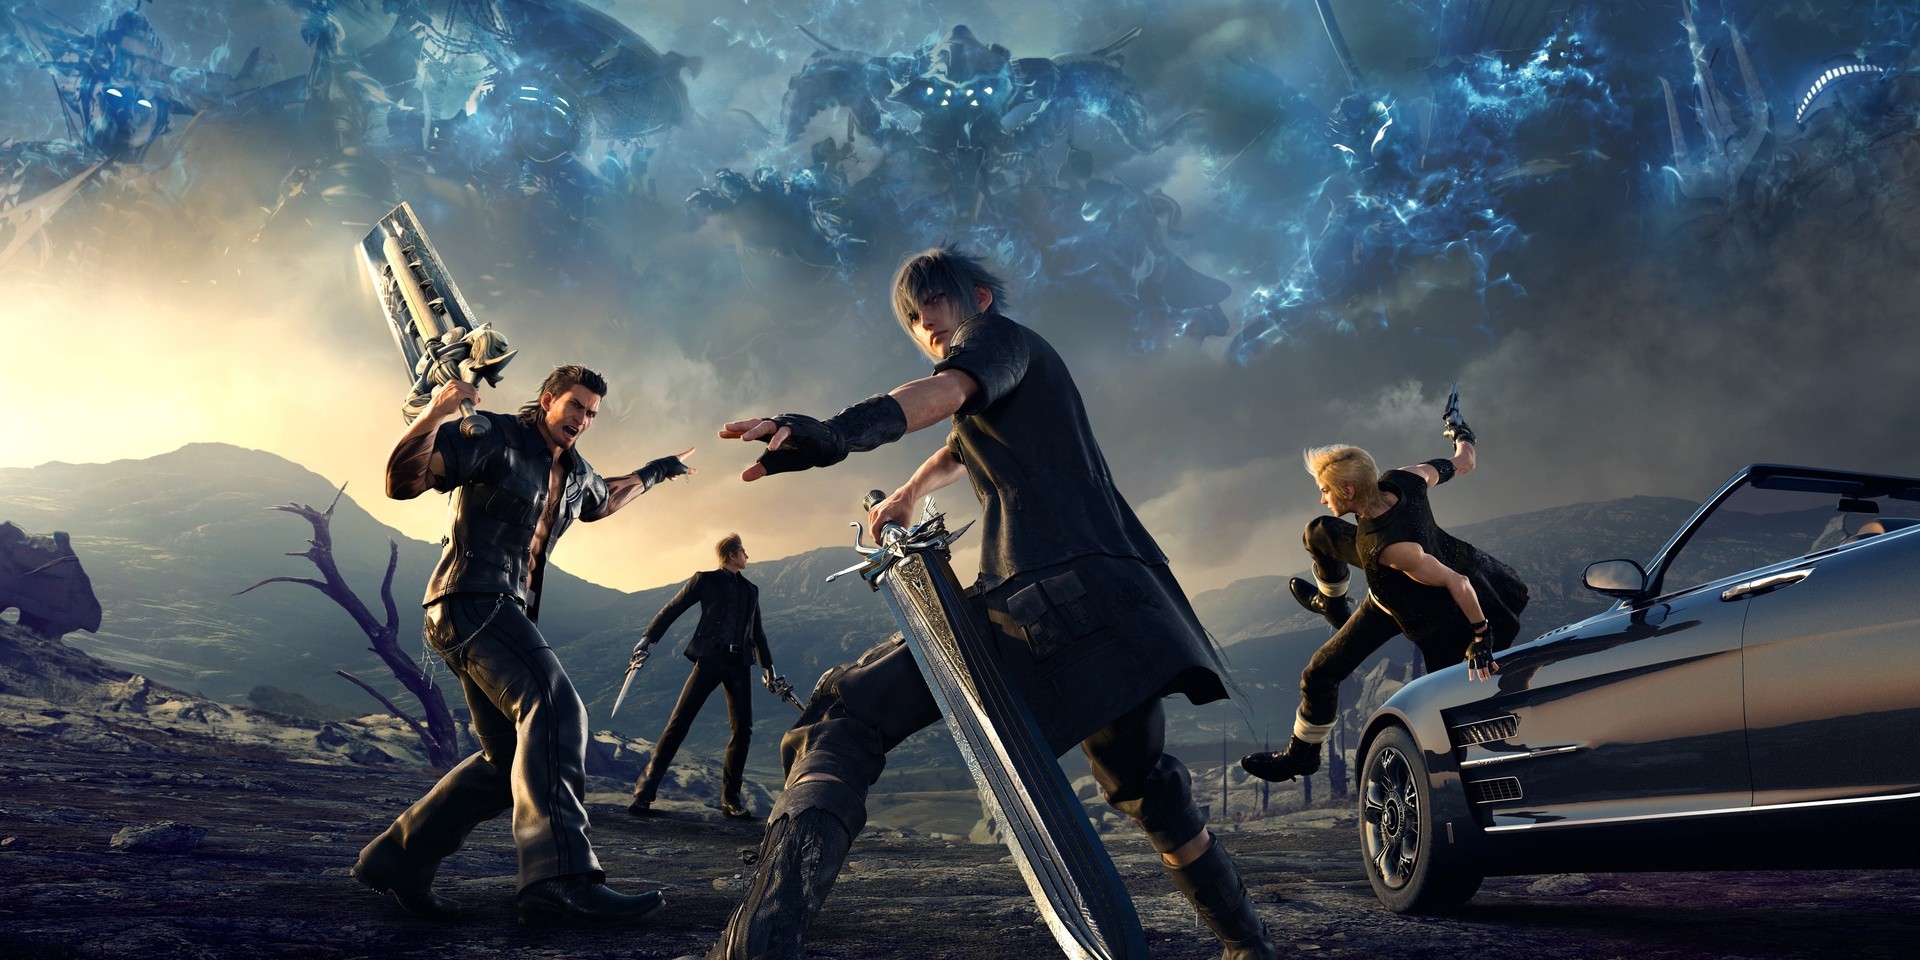 Watch an orchestra perform music from Final Fantasy live in Singapore